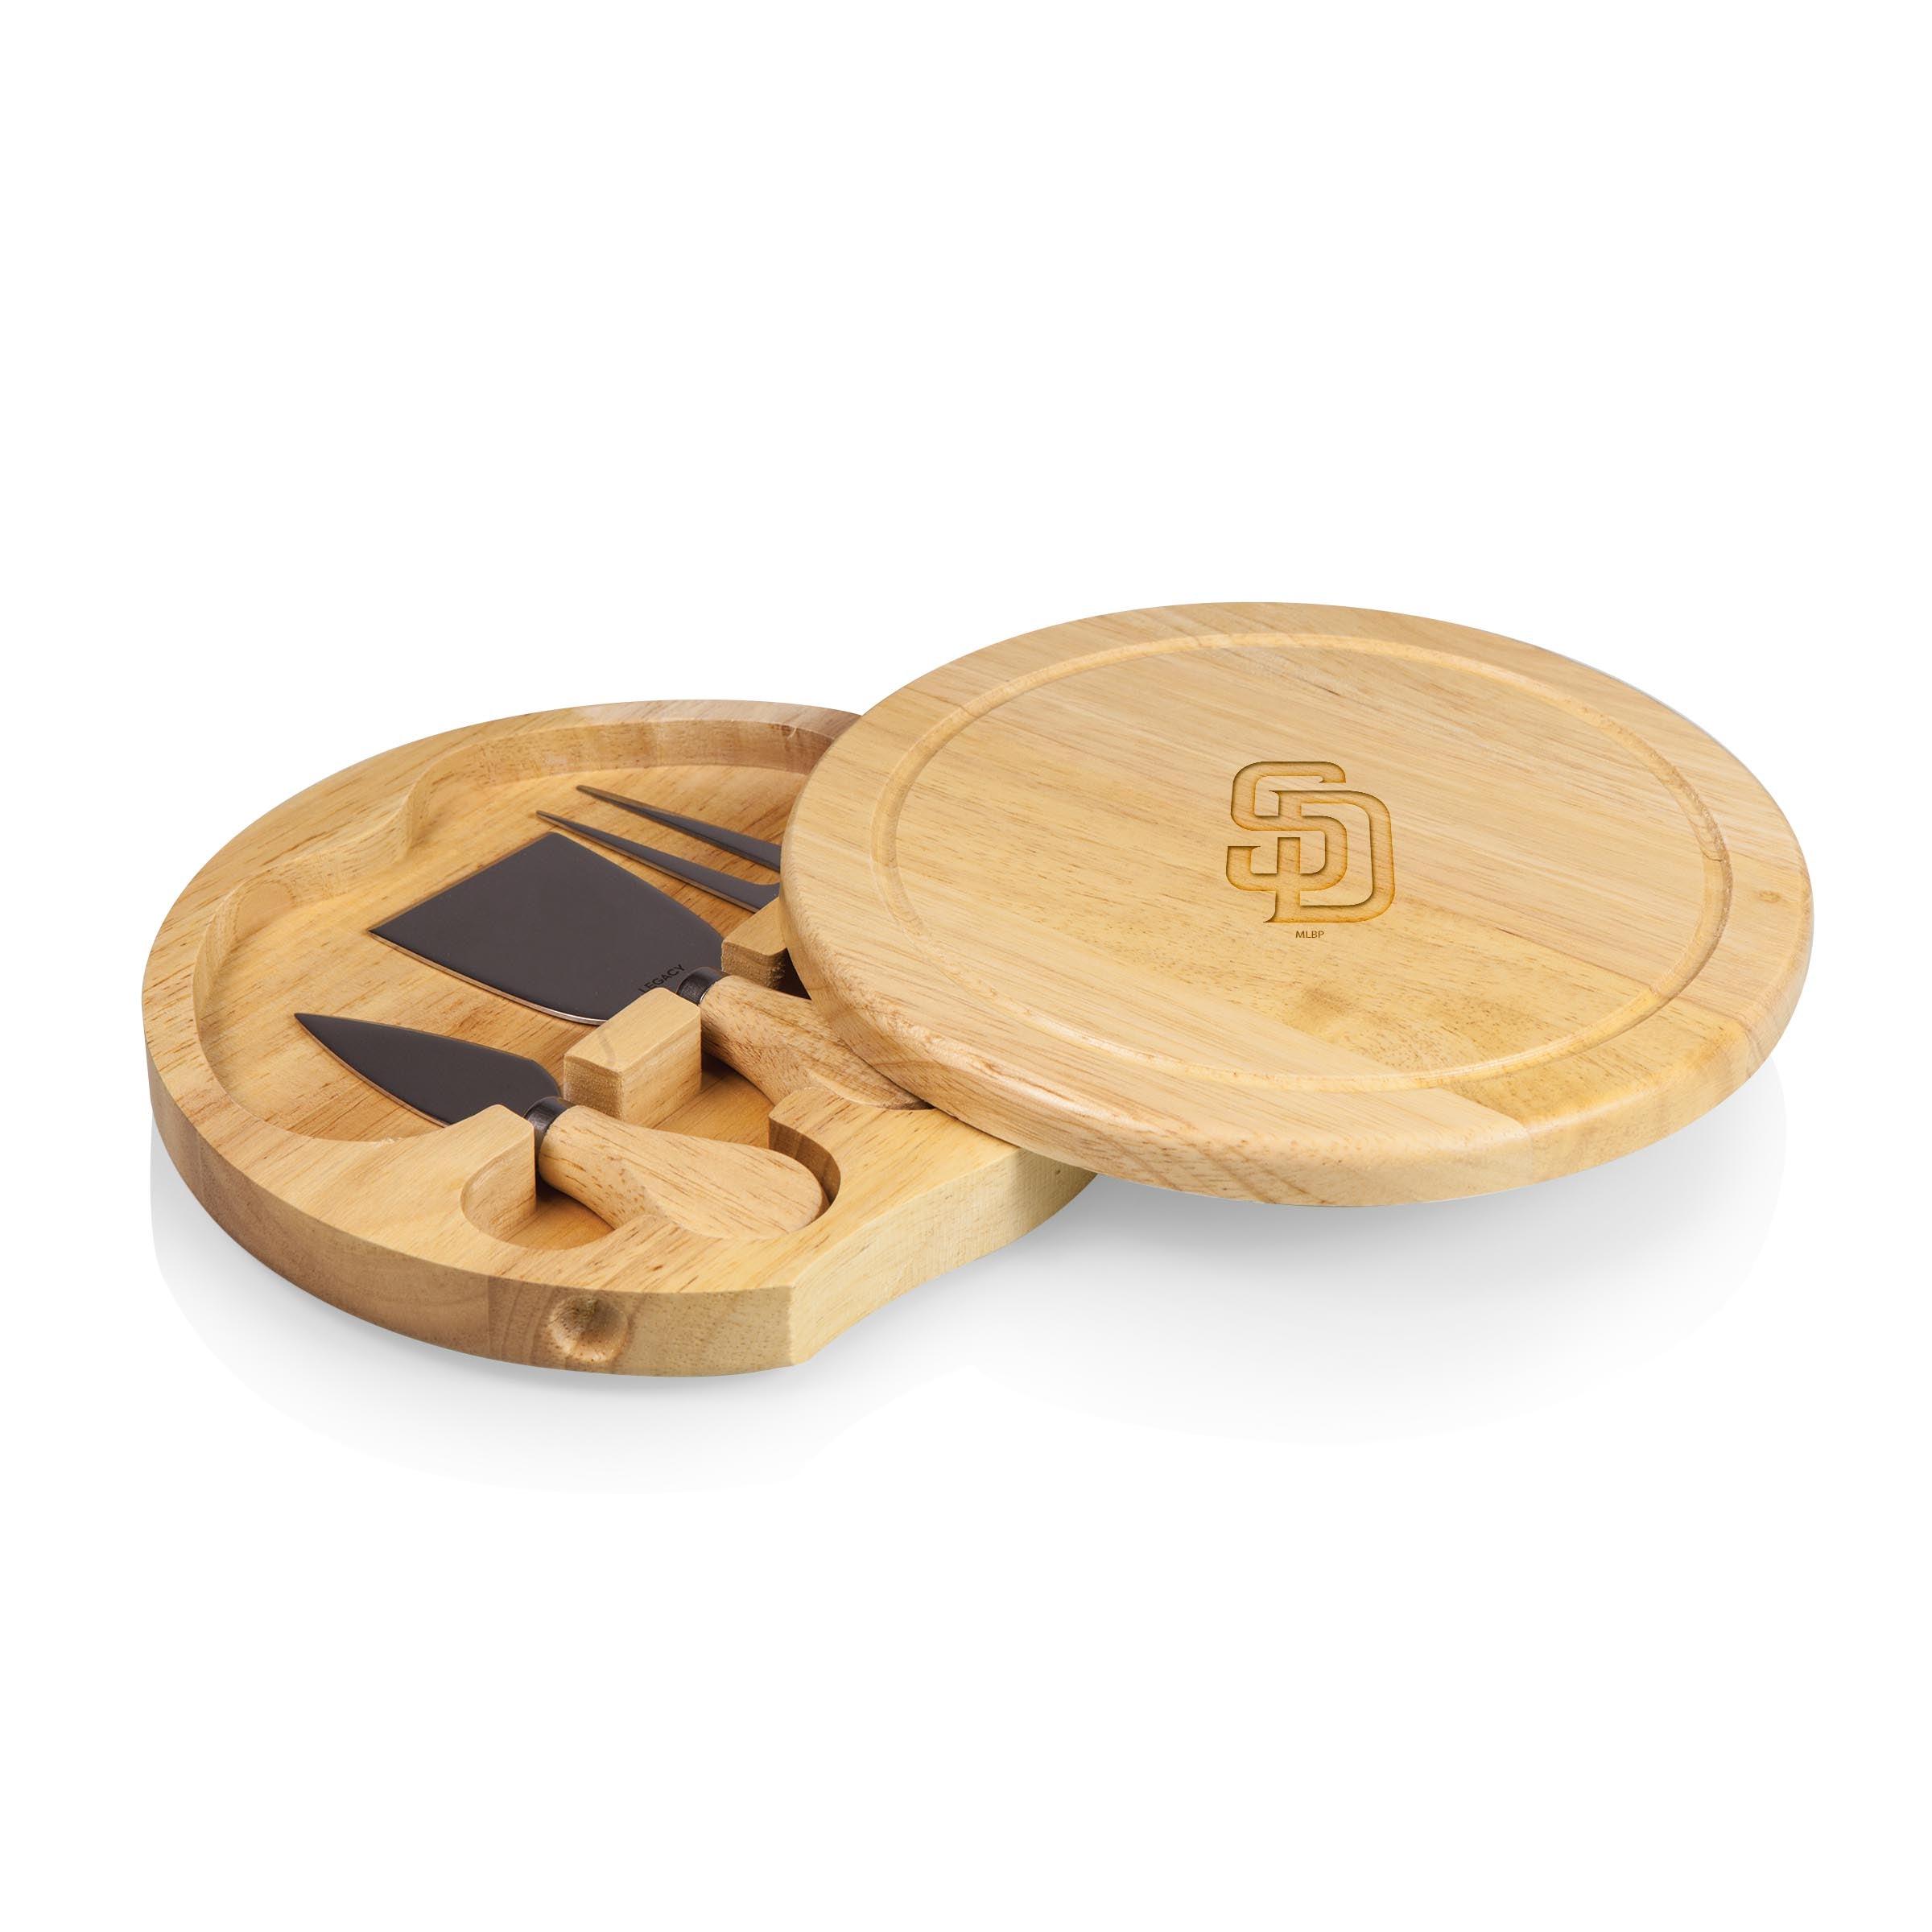 San Diego Padres - Brie Cheese Cutting Board & Tools Set